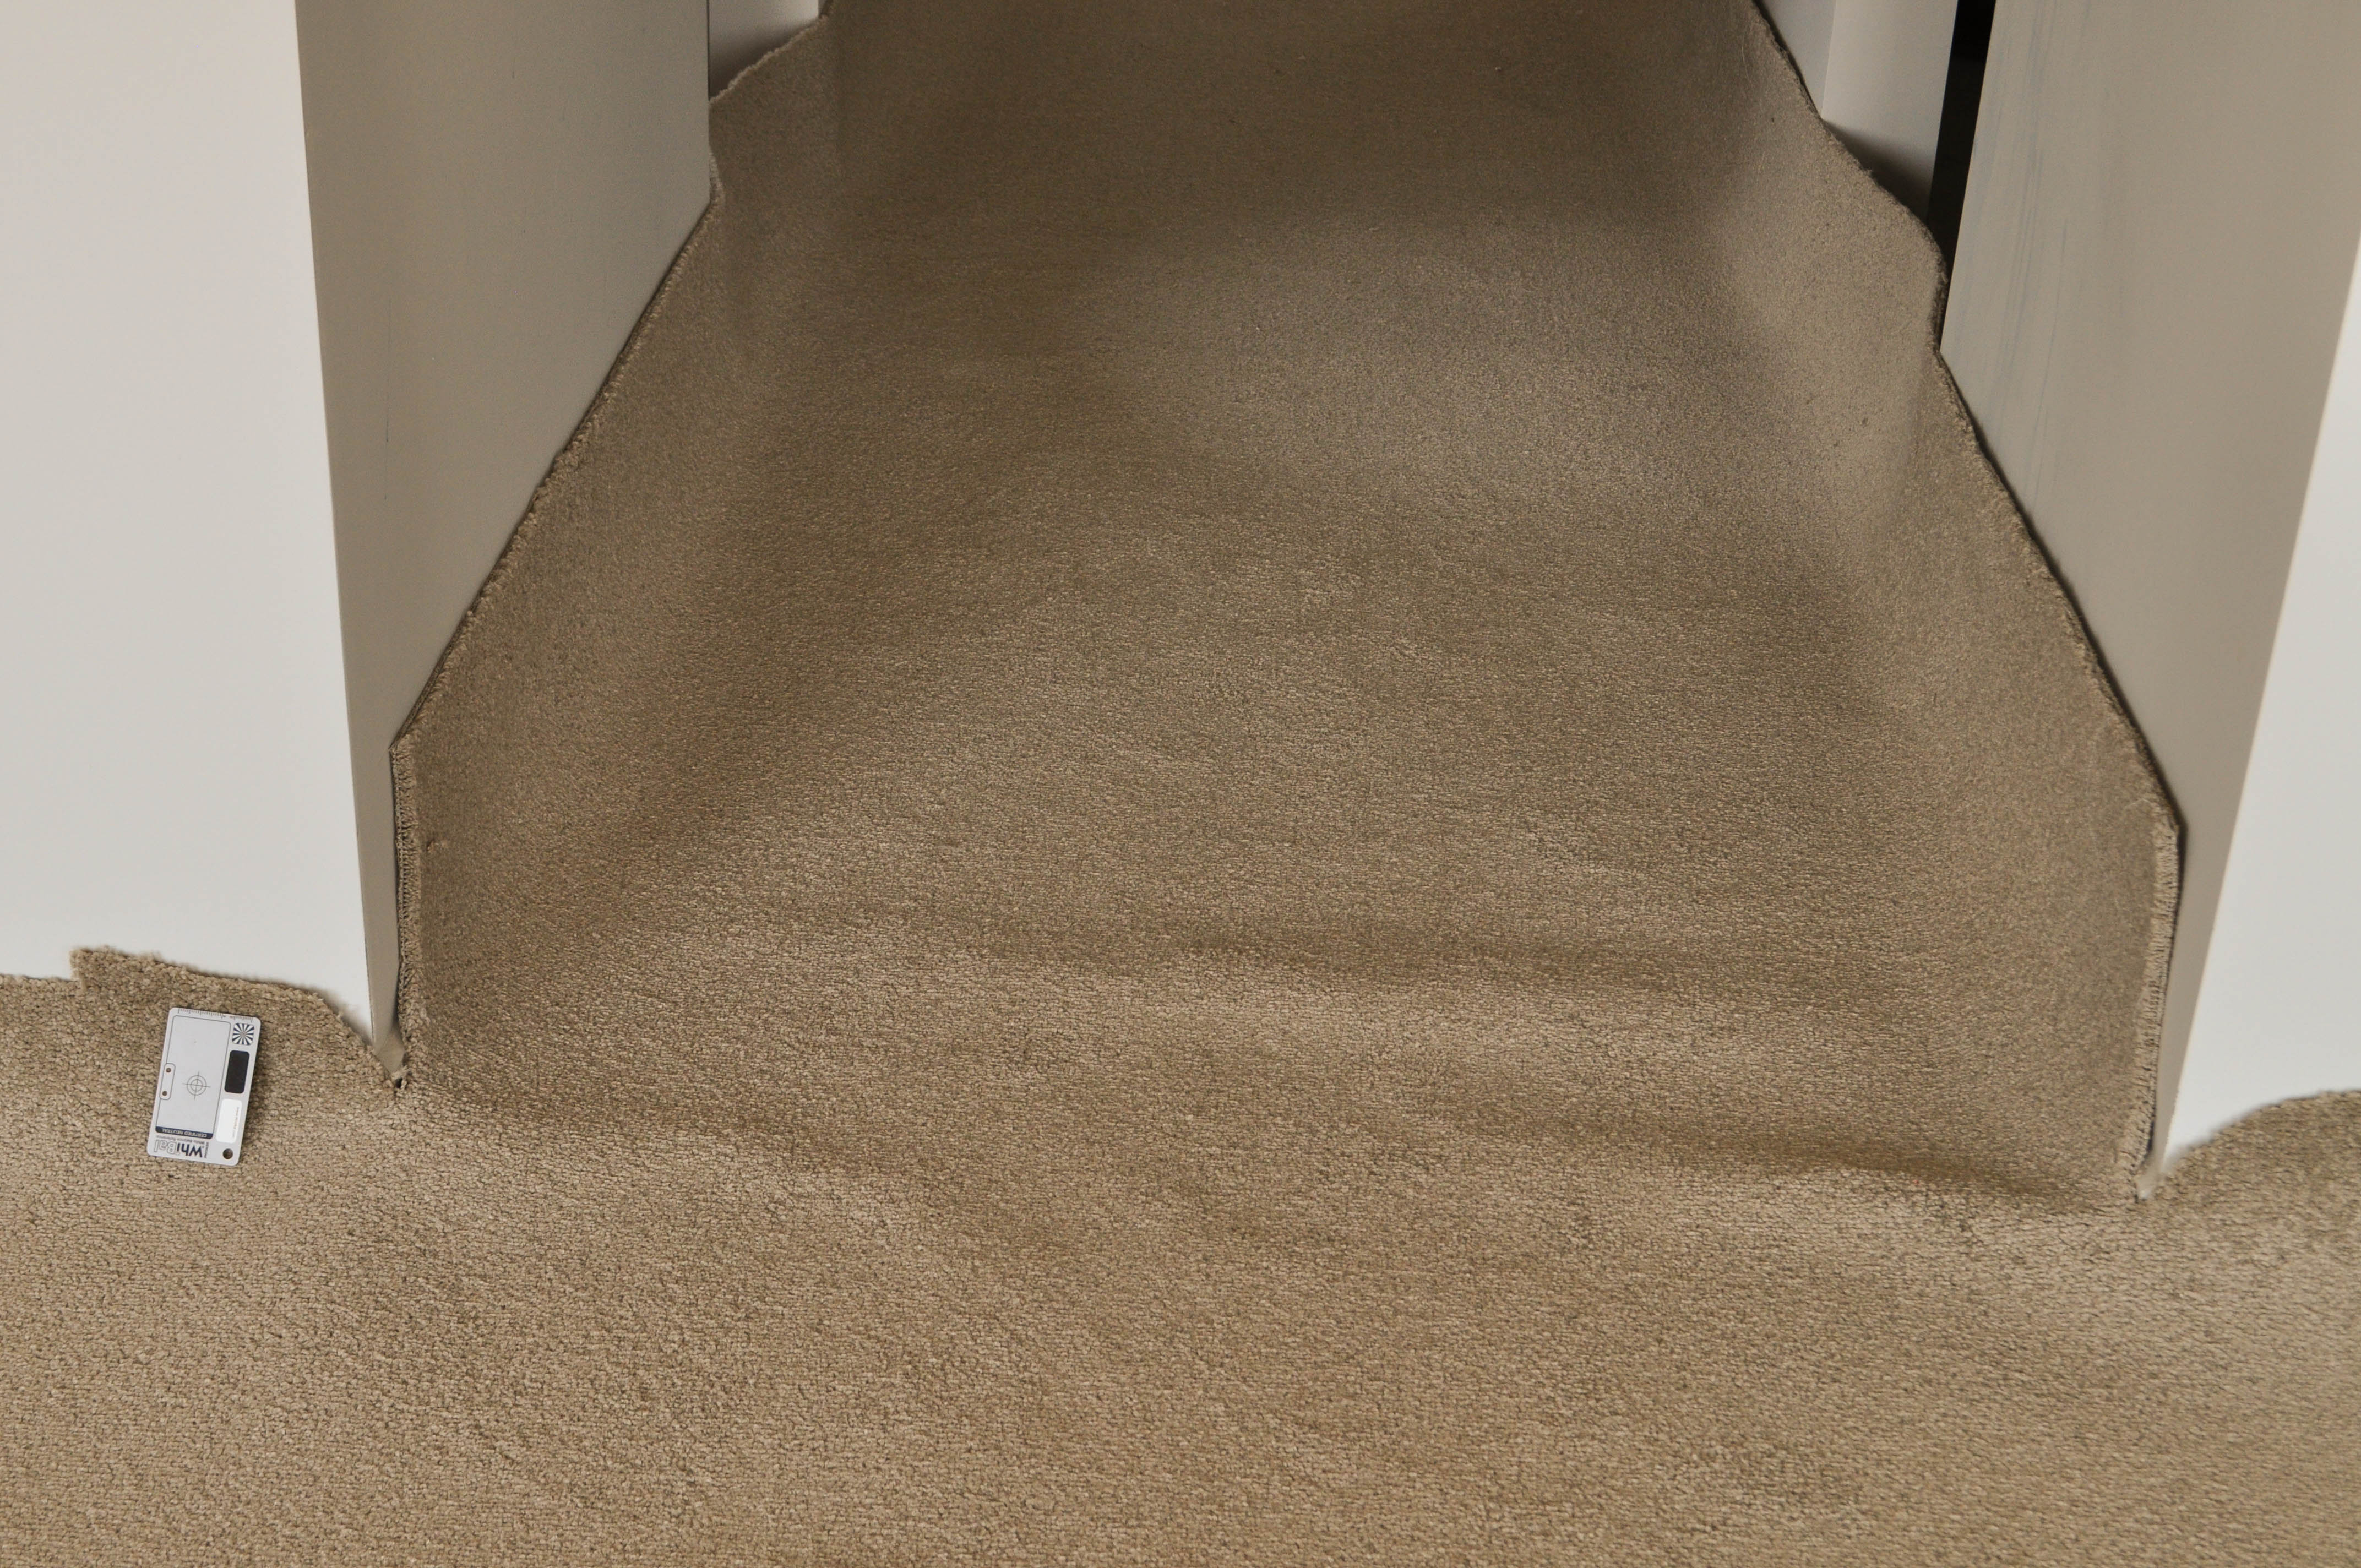 showing the floor in a lounge room and adjoining passage that has a cream colored broadloom carpet being installed on top of it.